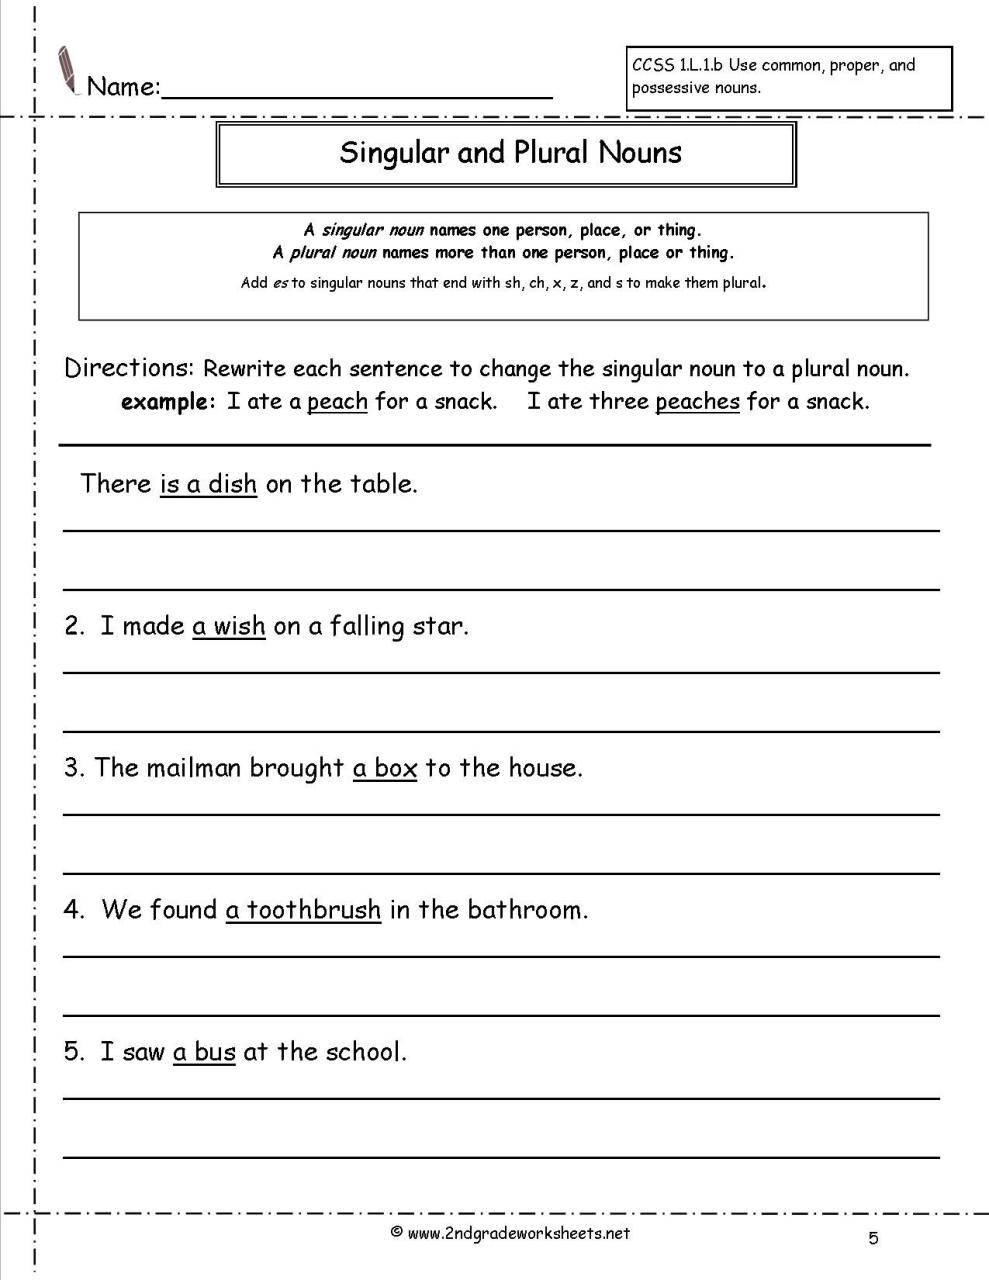 Transition Words Worksheet With Answers Pdf